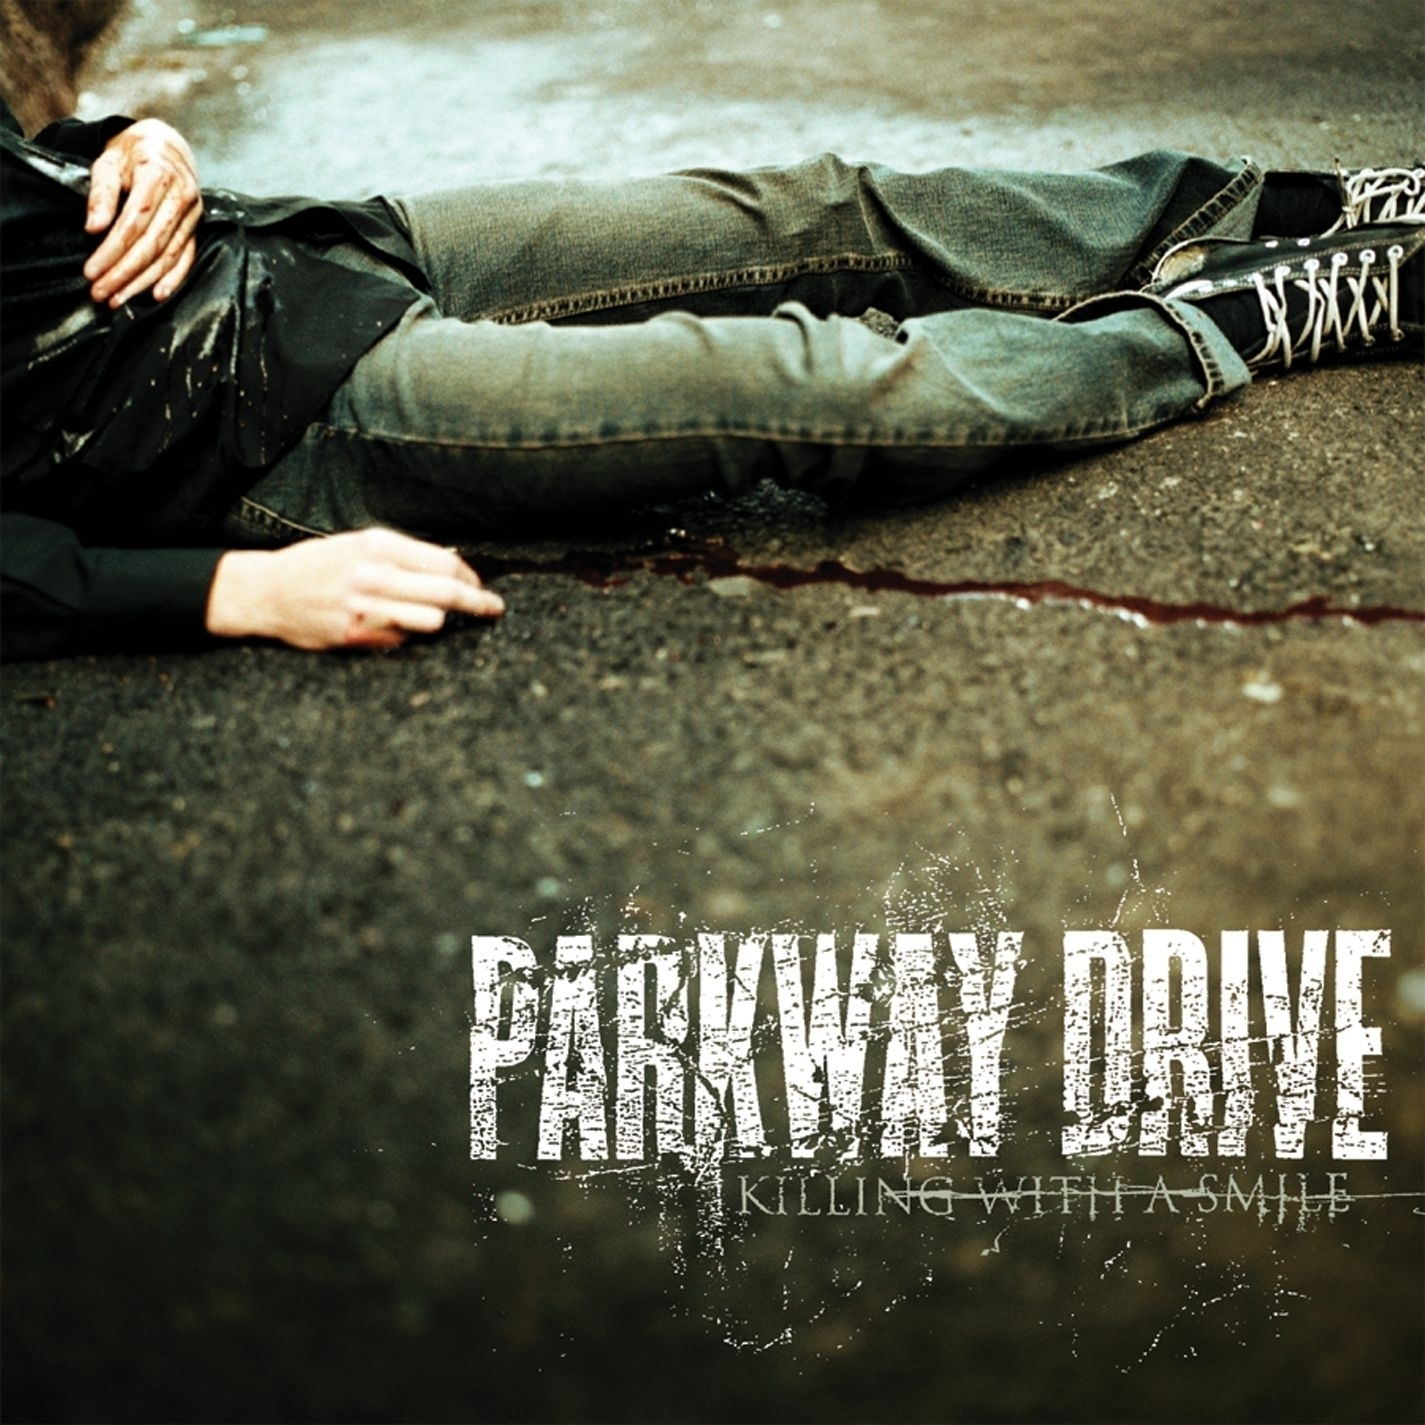 Parkway Drive - Killing with a Smile (2005) Album Info